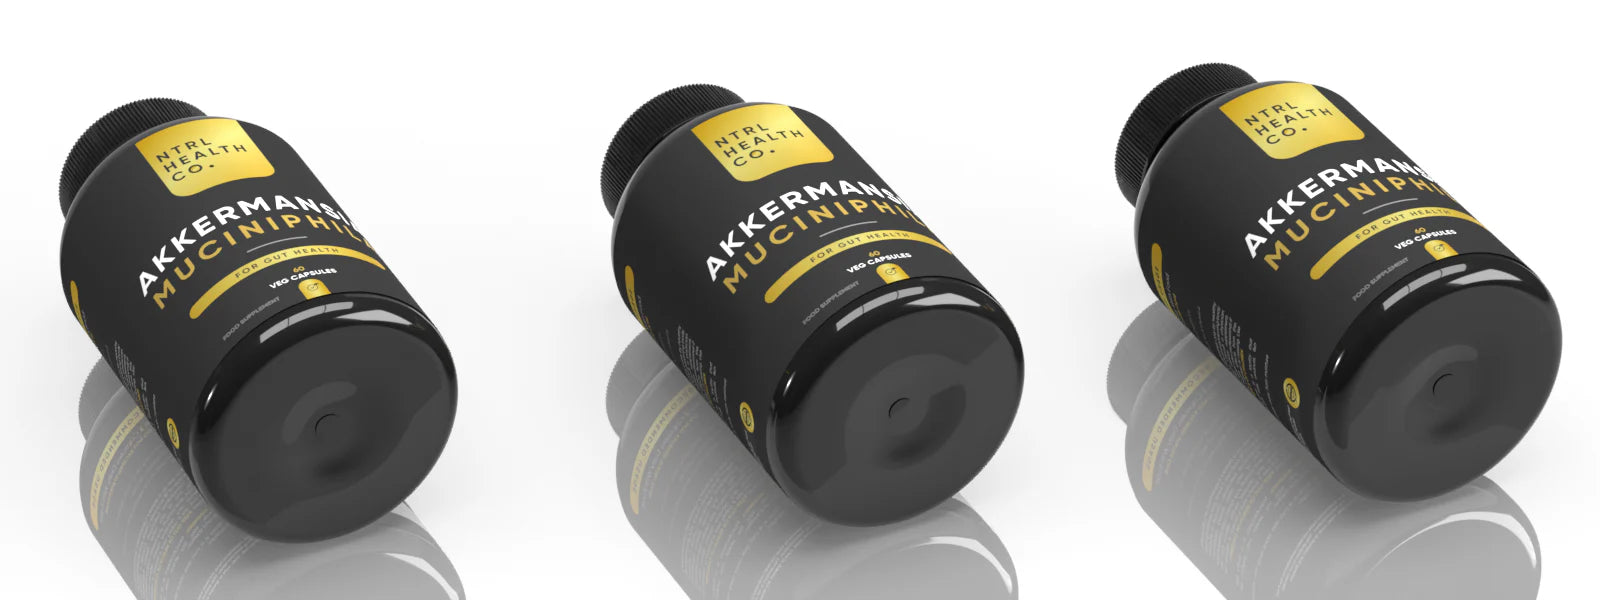 Why you should chose pasteurized akkermansia over live akkermansia supplements: